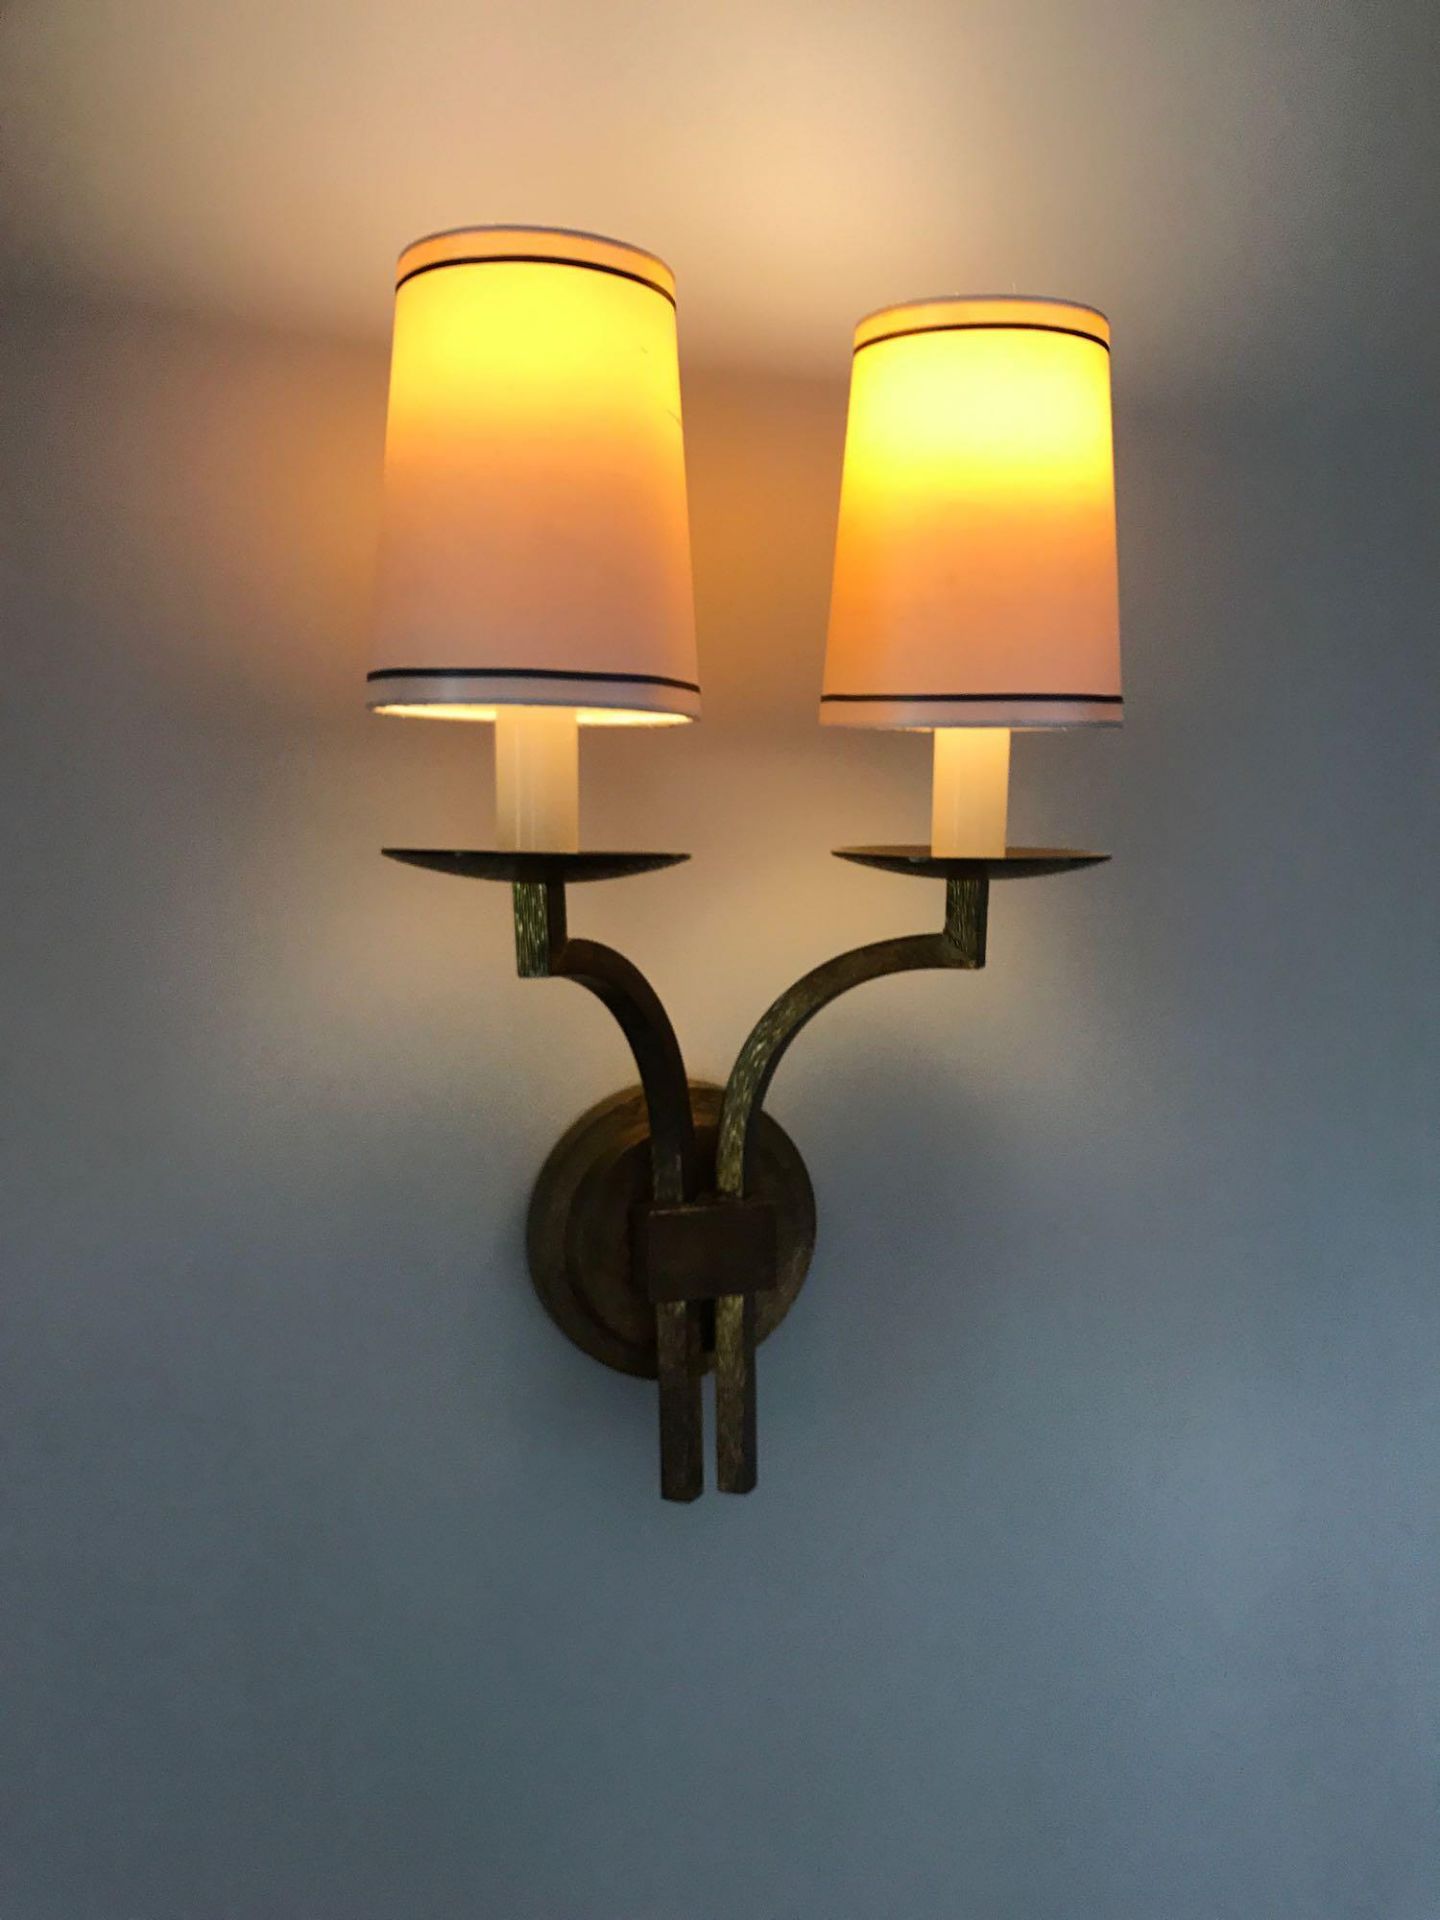 A Pair Dernier And Hamlyn Twin Arm Antique Bronzed Wall Sconces With Shade Room 617